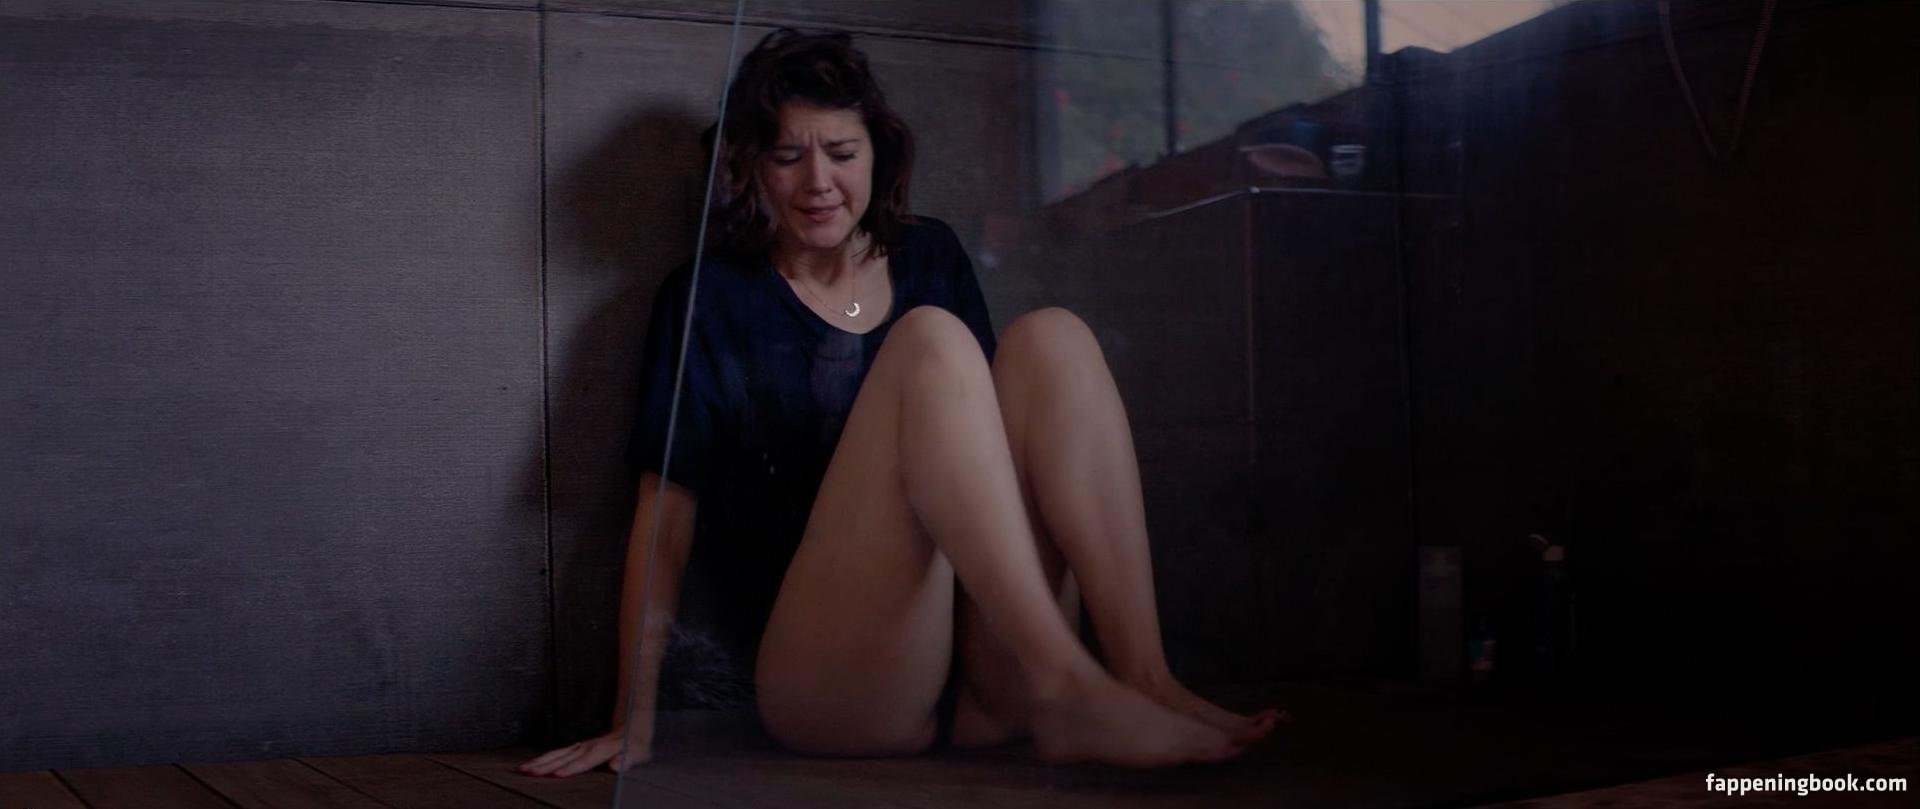 Mary winstead fappening